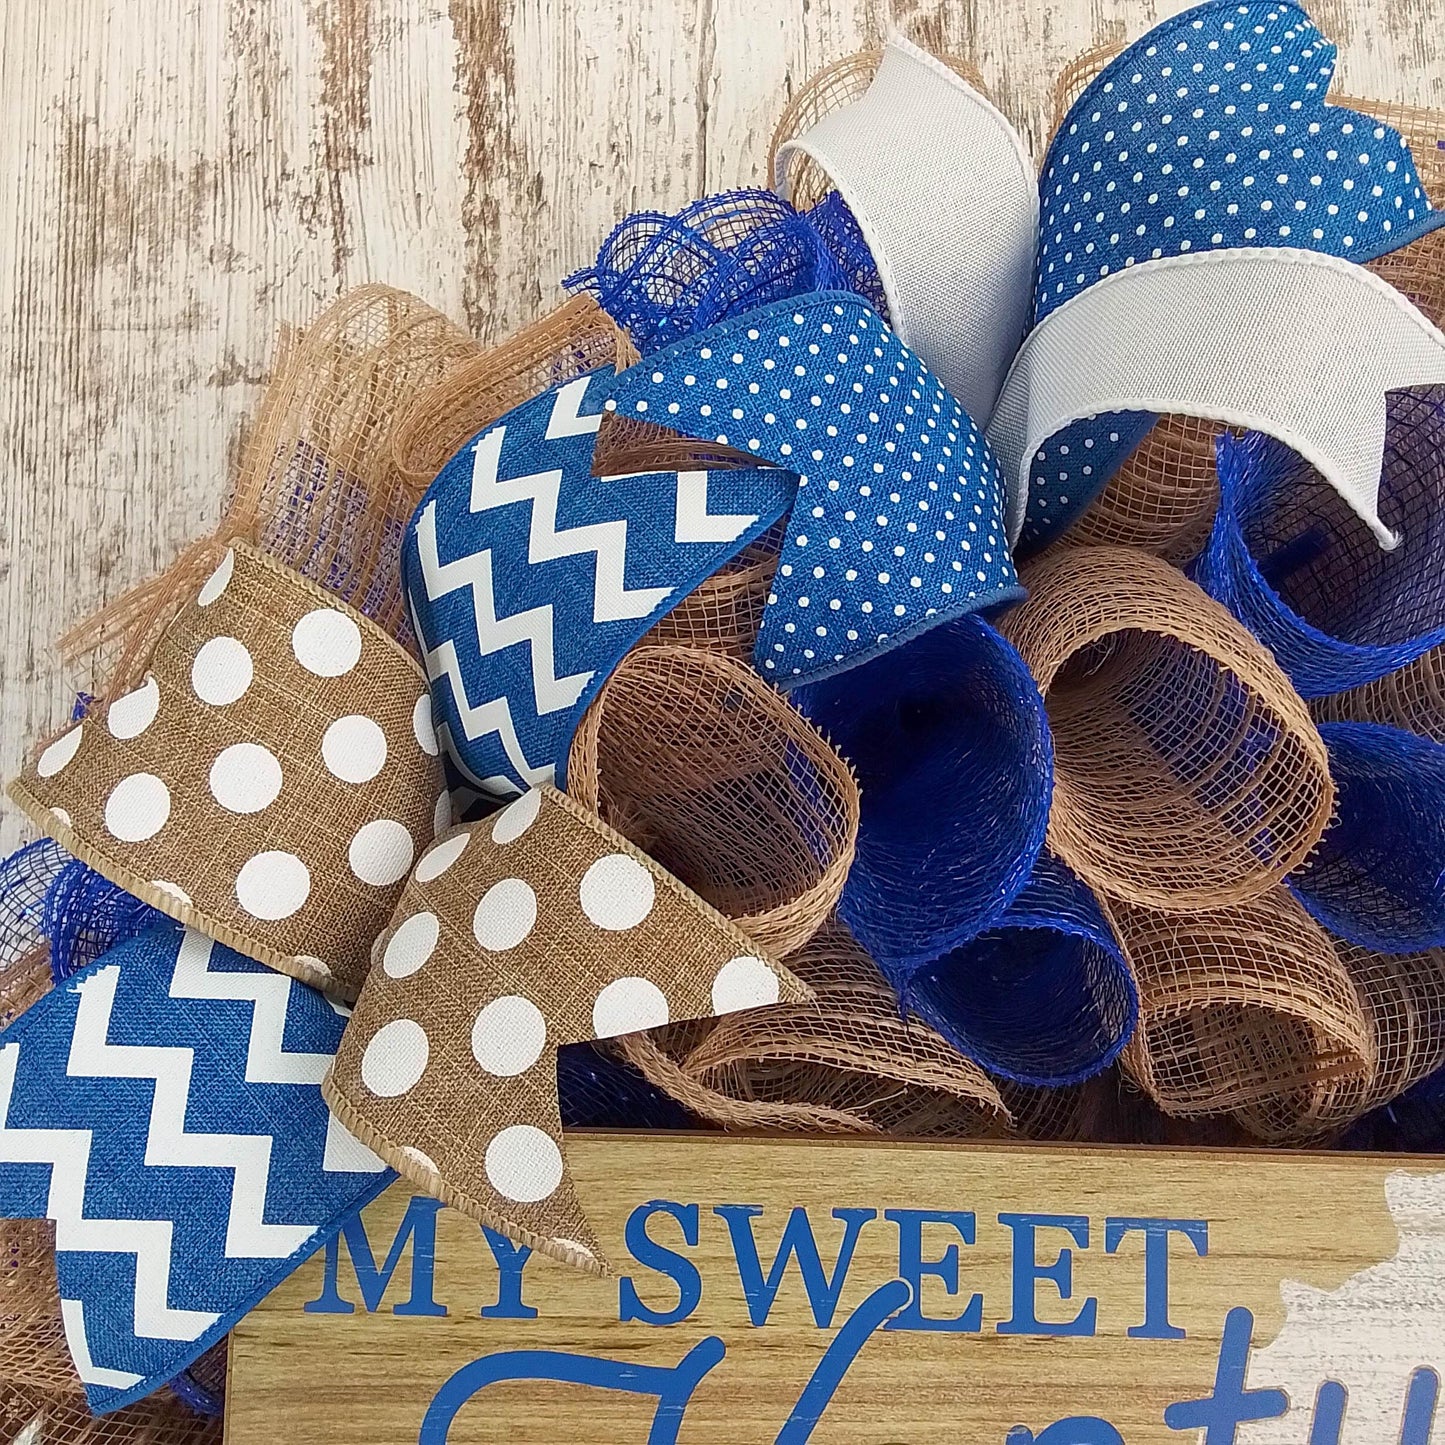 My Sweet Kentucky Home Front Door Wreaths - Royal Blue White Mothers Day Gift - Burlap Everyday Year Round Outdoor Decor - Pink Door Wreaths